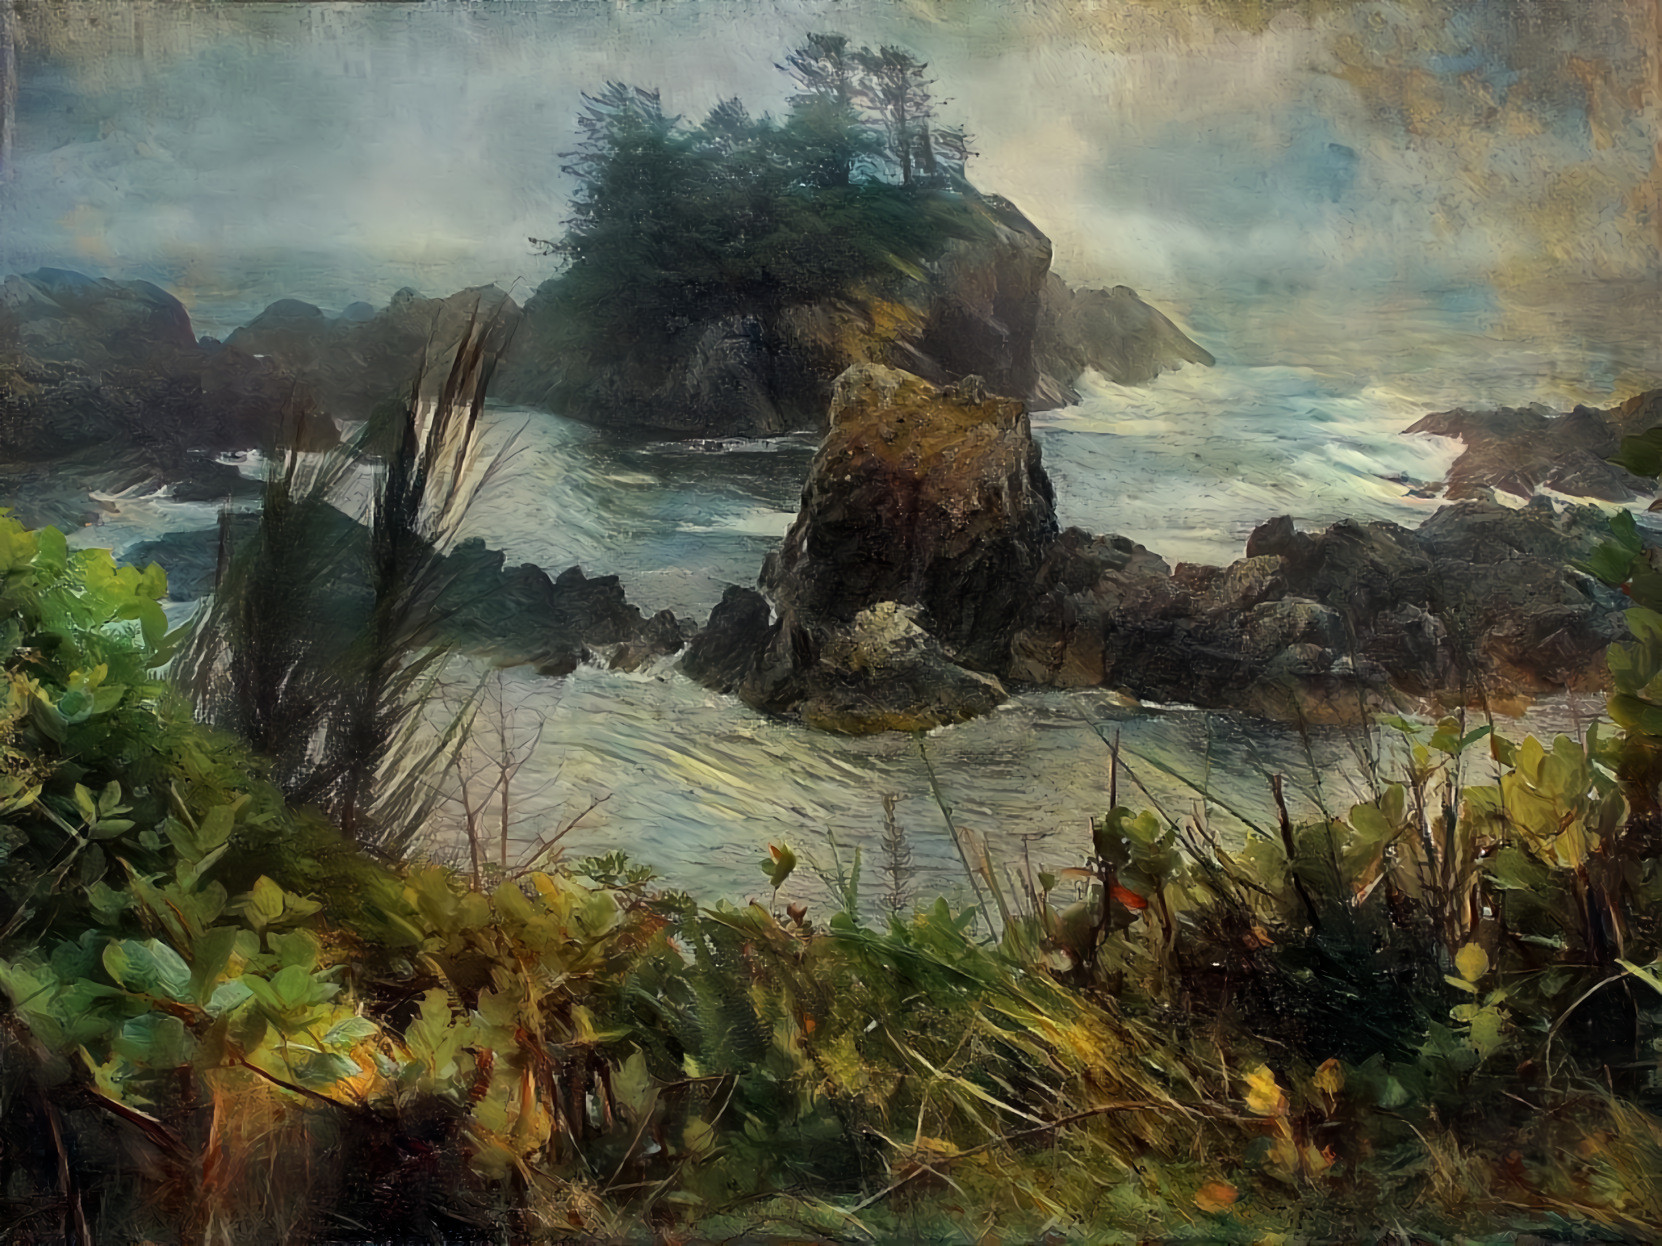 Fragile Lands.  Original photo taken on the "Wild Pacific Trail" in Ucluelet, British Columbia, by Jack (jackaloha2) on Flickr, using a texture by Kerstin Frank Art.